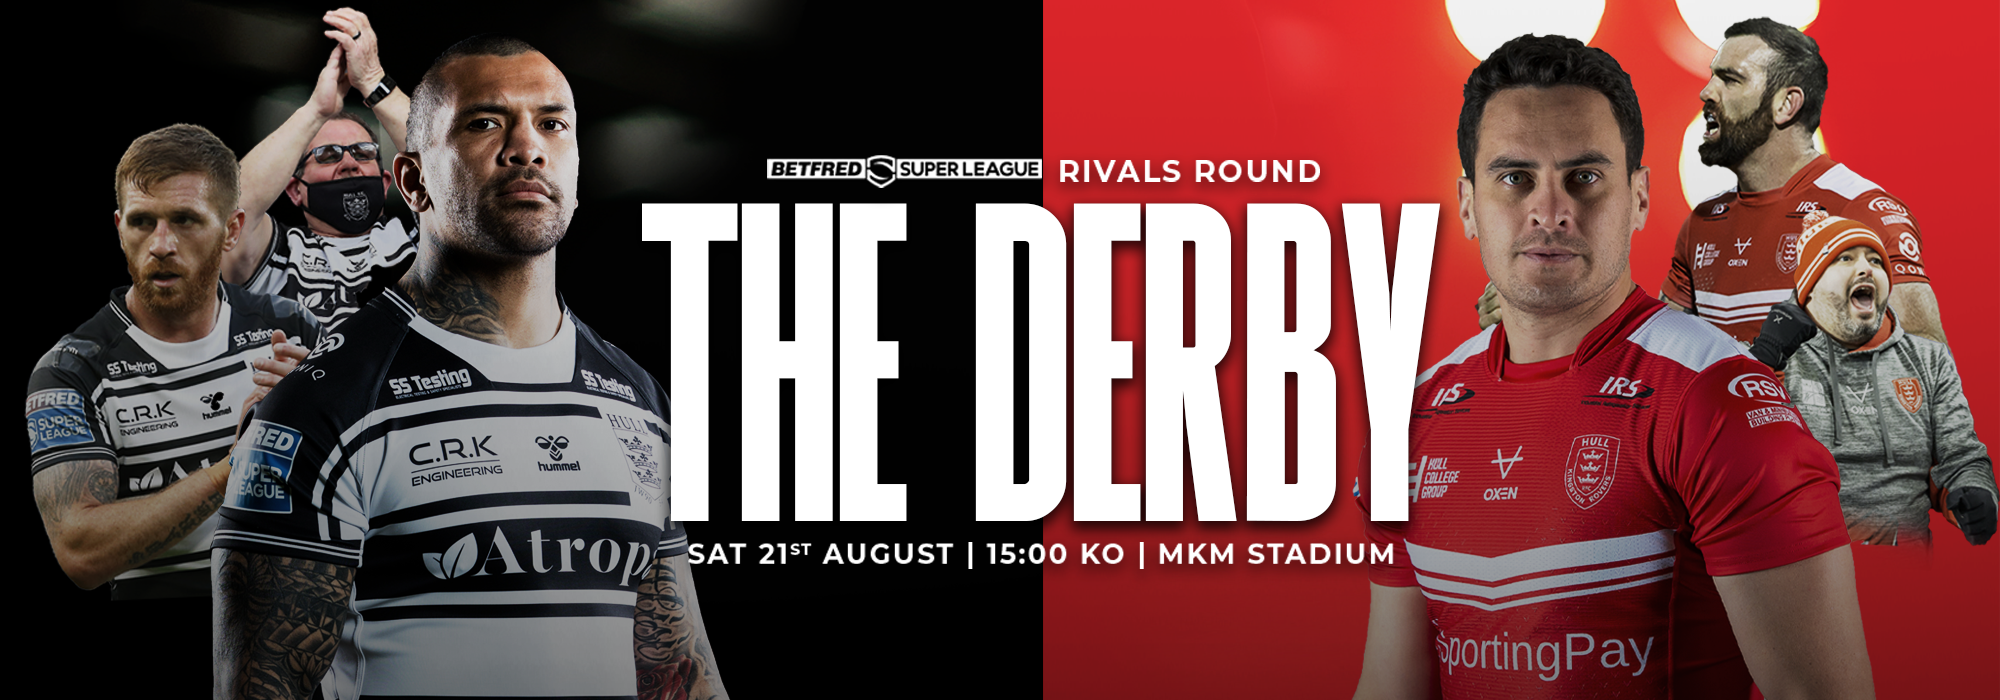 Five Reasons Why You Absolutely Should Not Miss #DerbyDay!